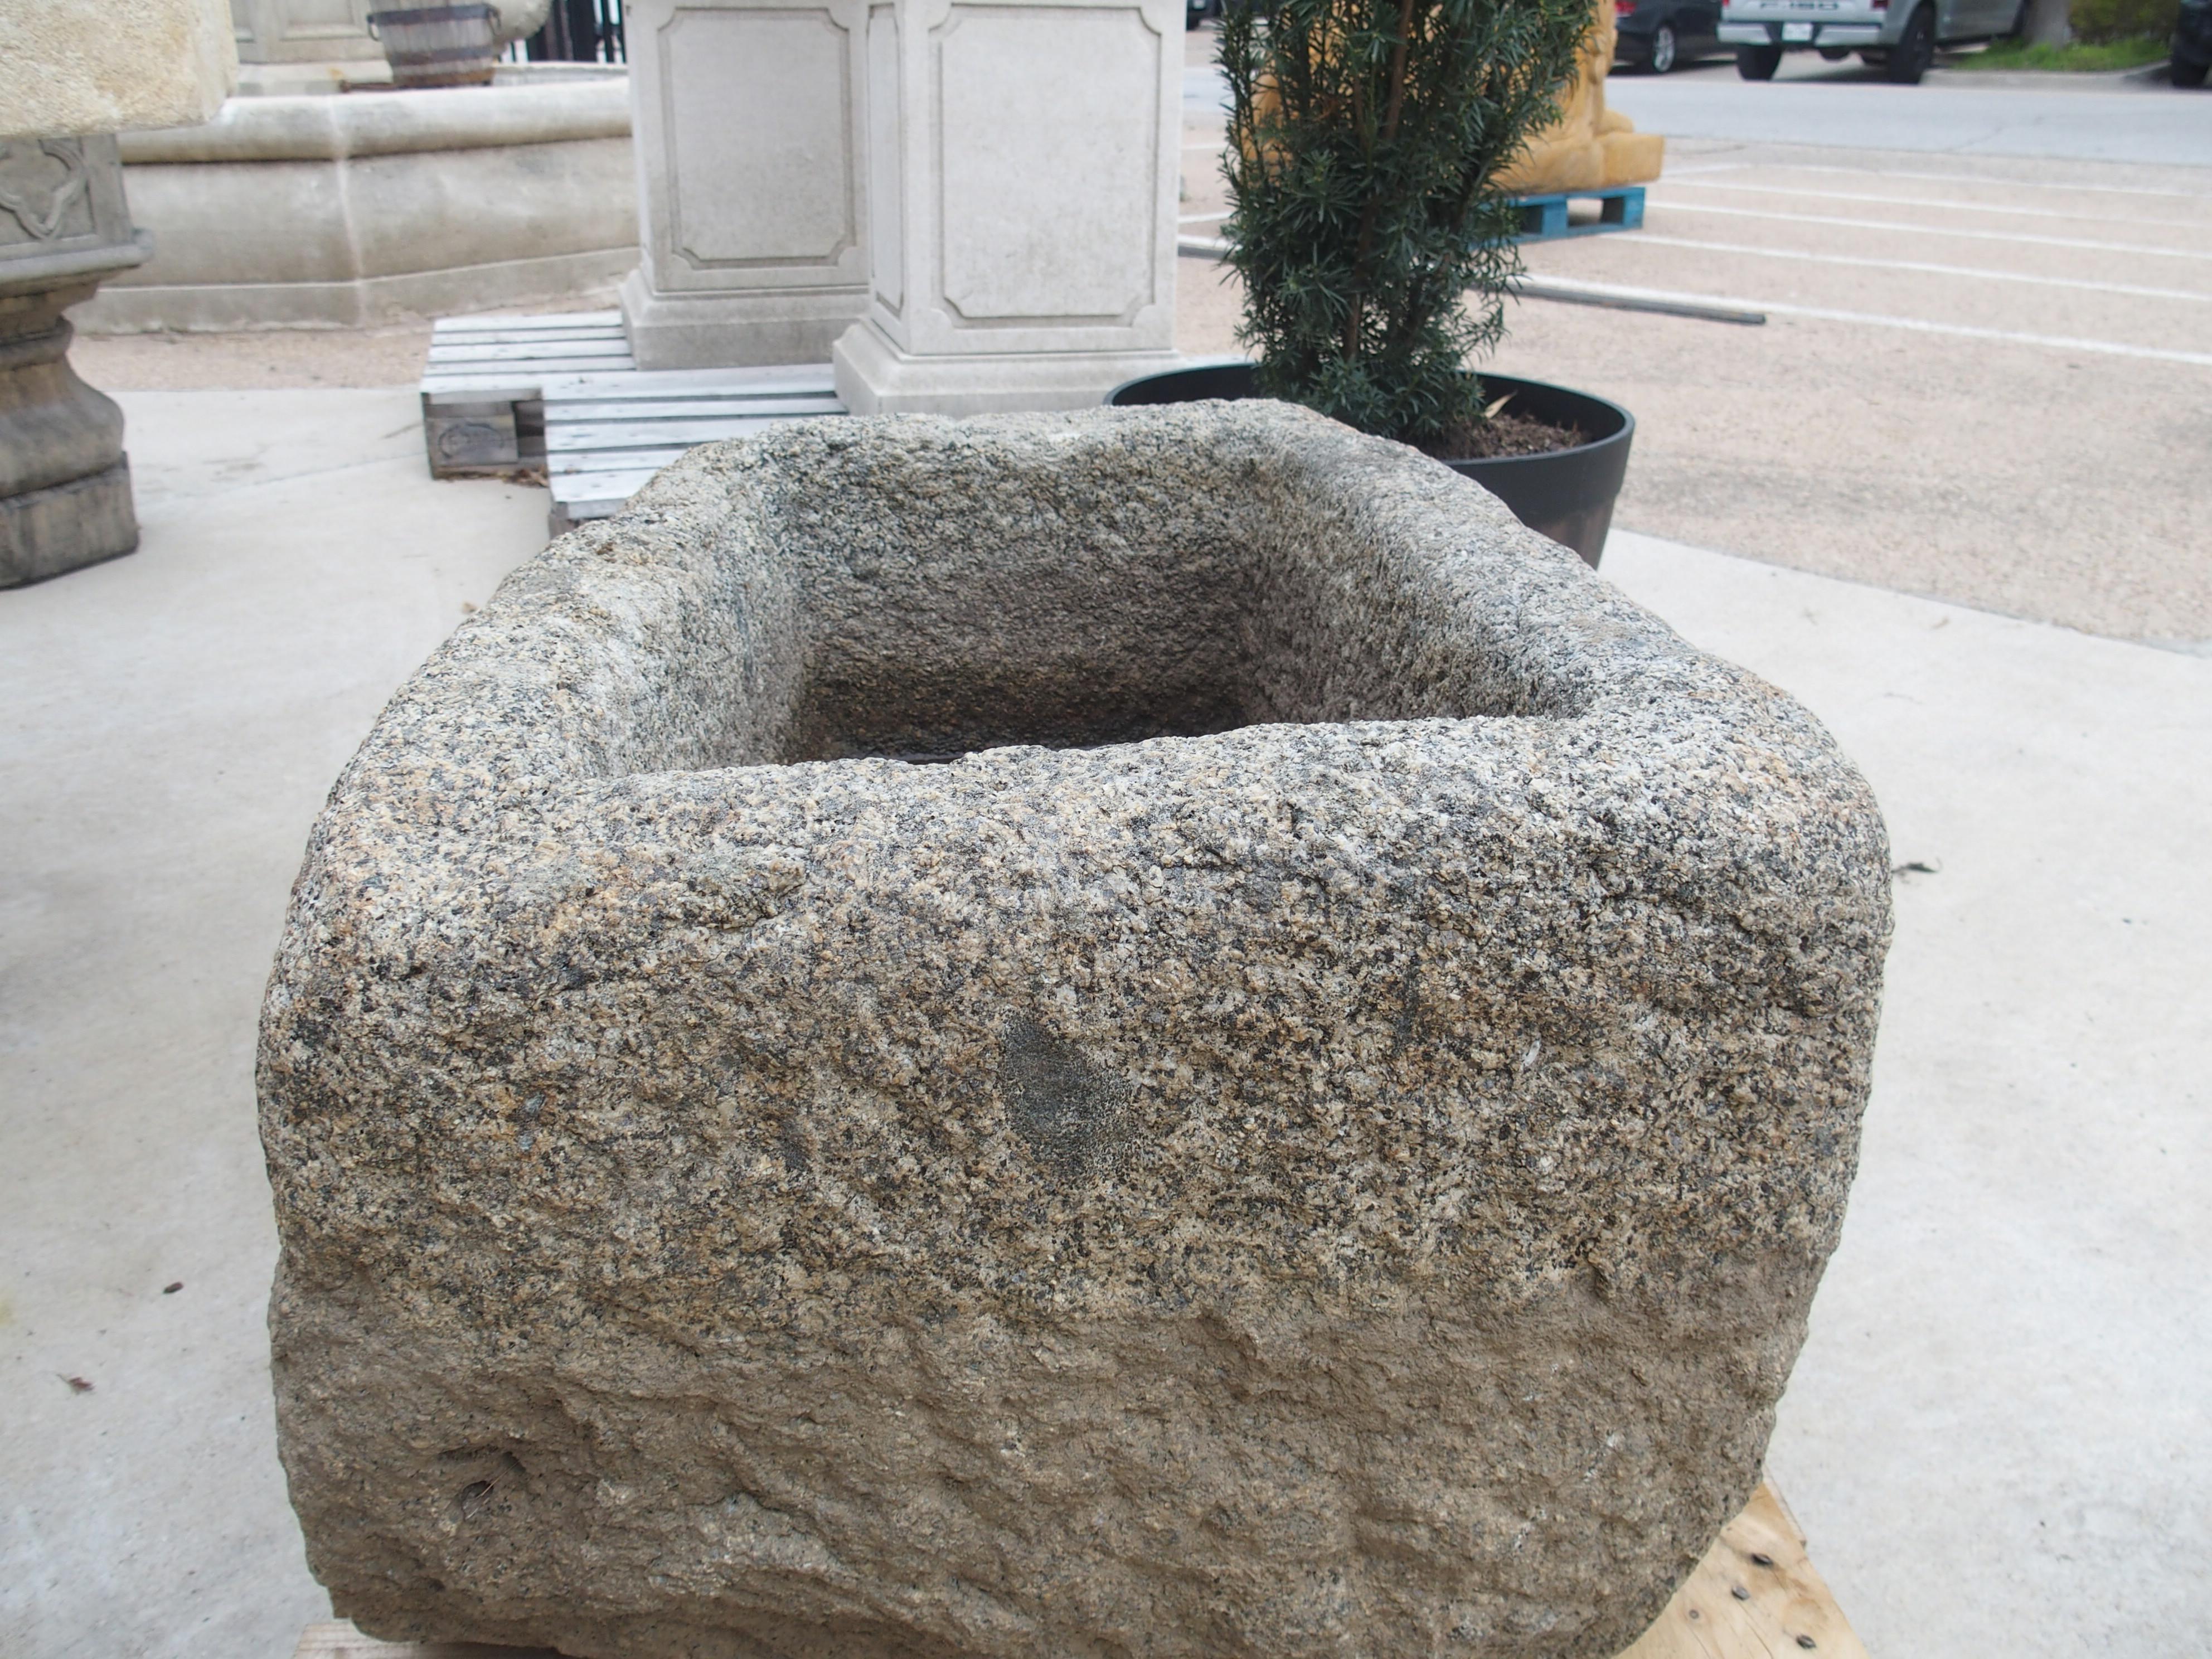 Hand-carved in Brittany, France, during the 1800’s, this weathered granite trough has a beautiful, speckled appearance as the result of inclusions and a centuries old patina. There is a demarcation line of color, indicating that the trough was